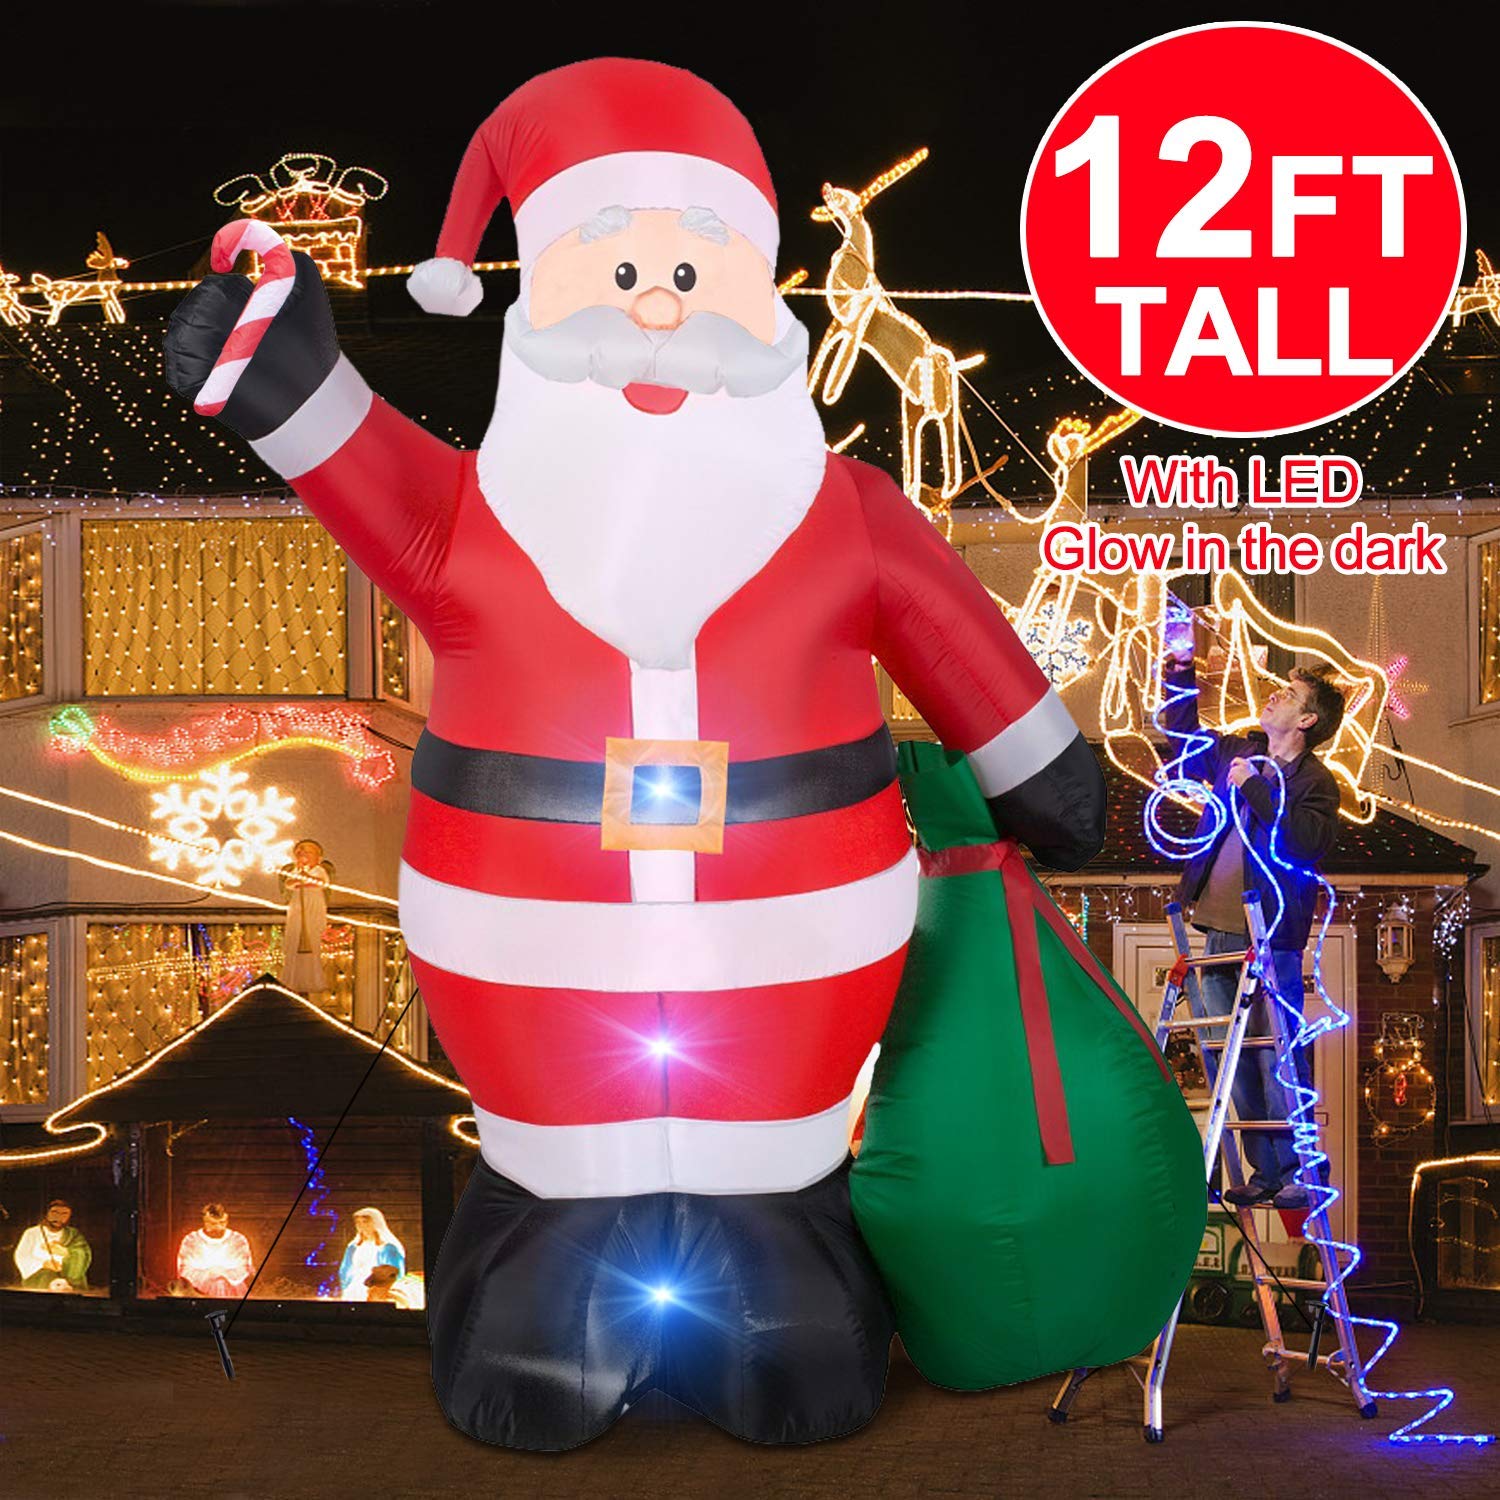 Christmas Inflatables Giant 12 Foot